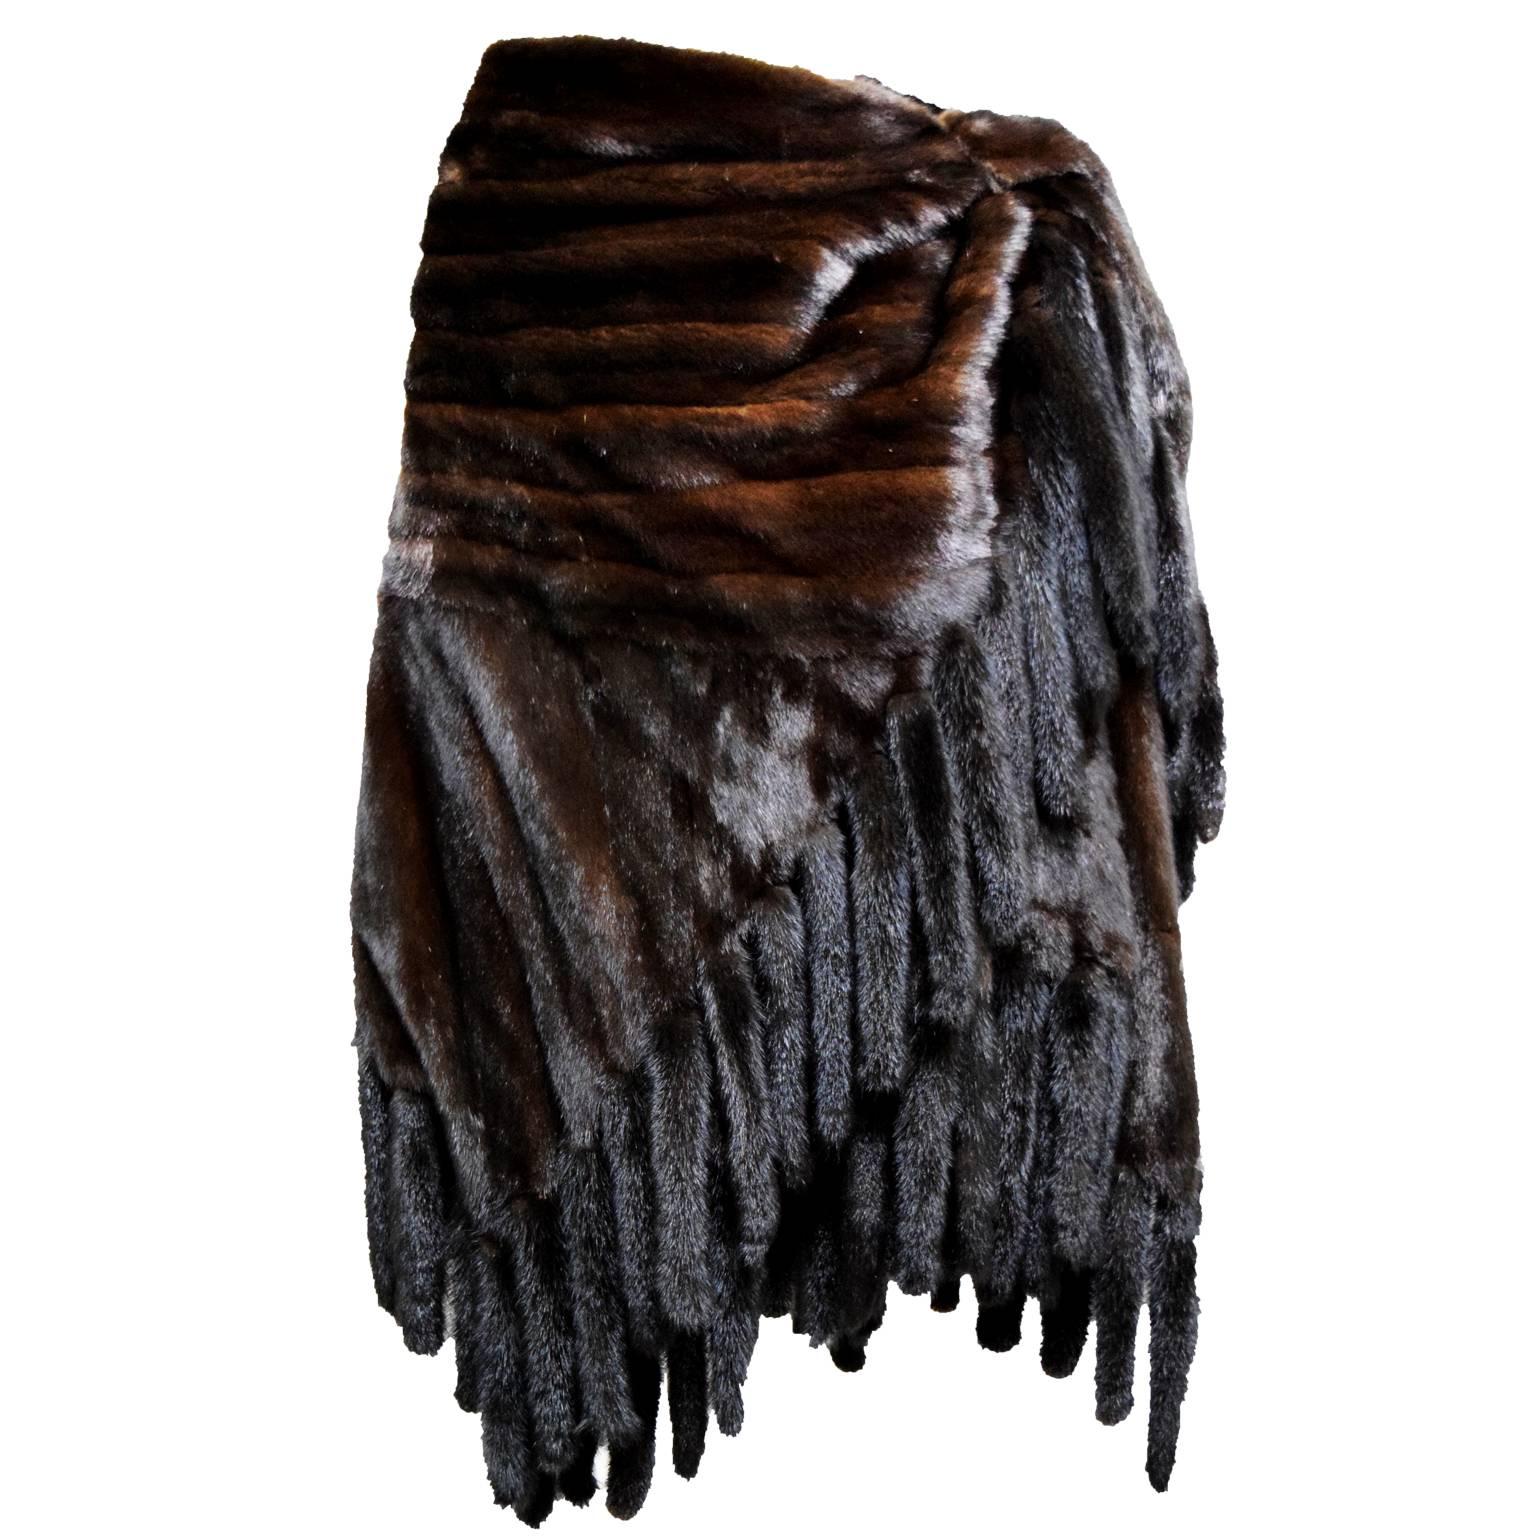 This beautiful Revillon Cape is made out of female mink, and has a rich mahogany undertone. Fully lined in silk, this amazing one of a kind piece has 96 mink tail and can be worn in many versatile ways. 